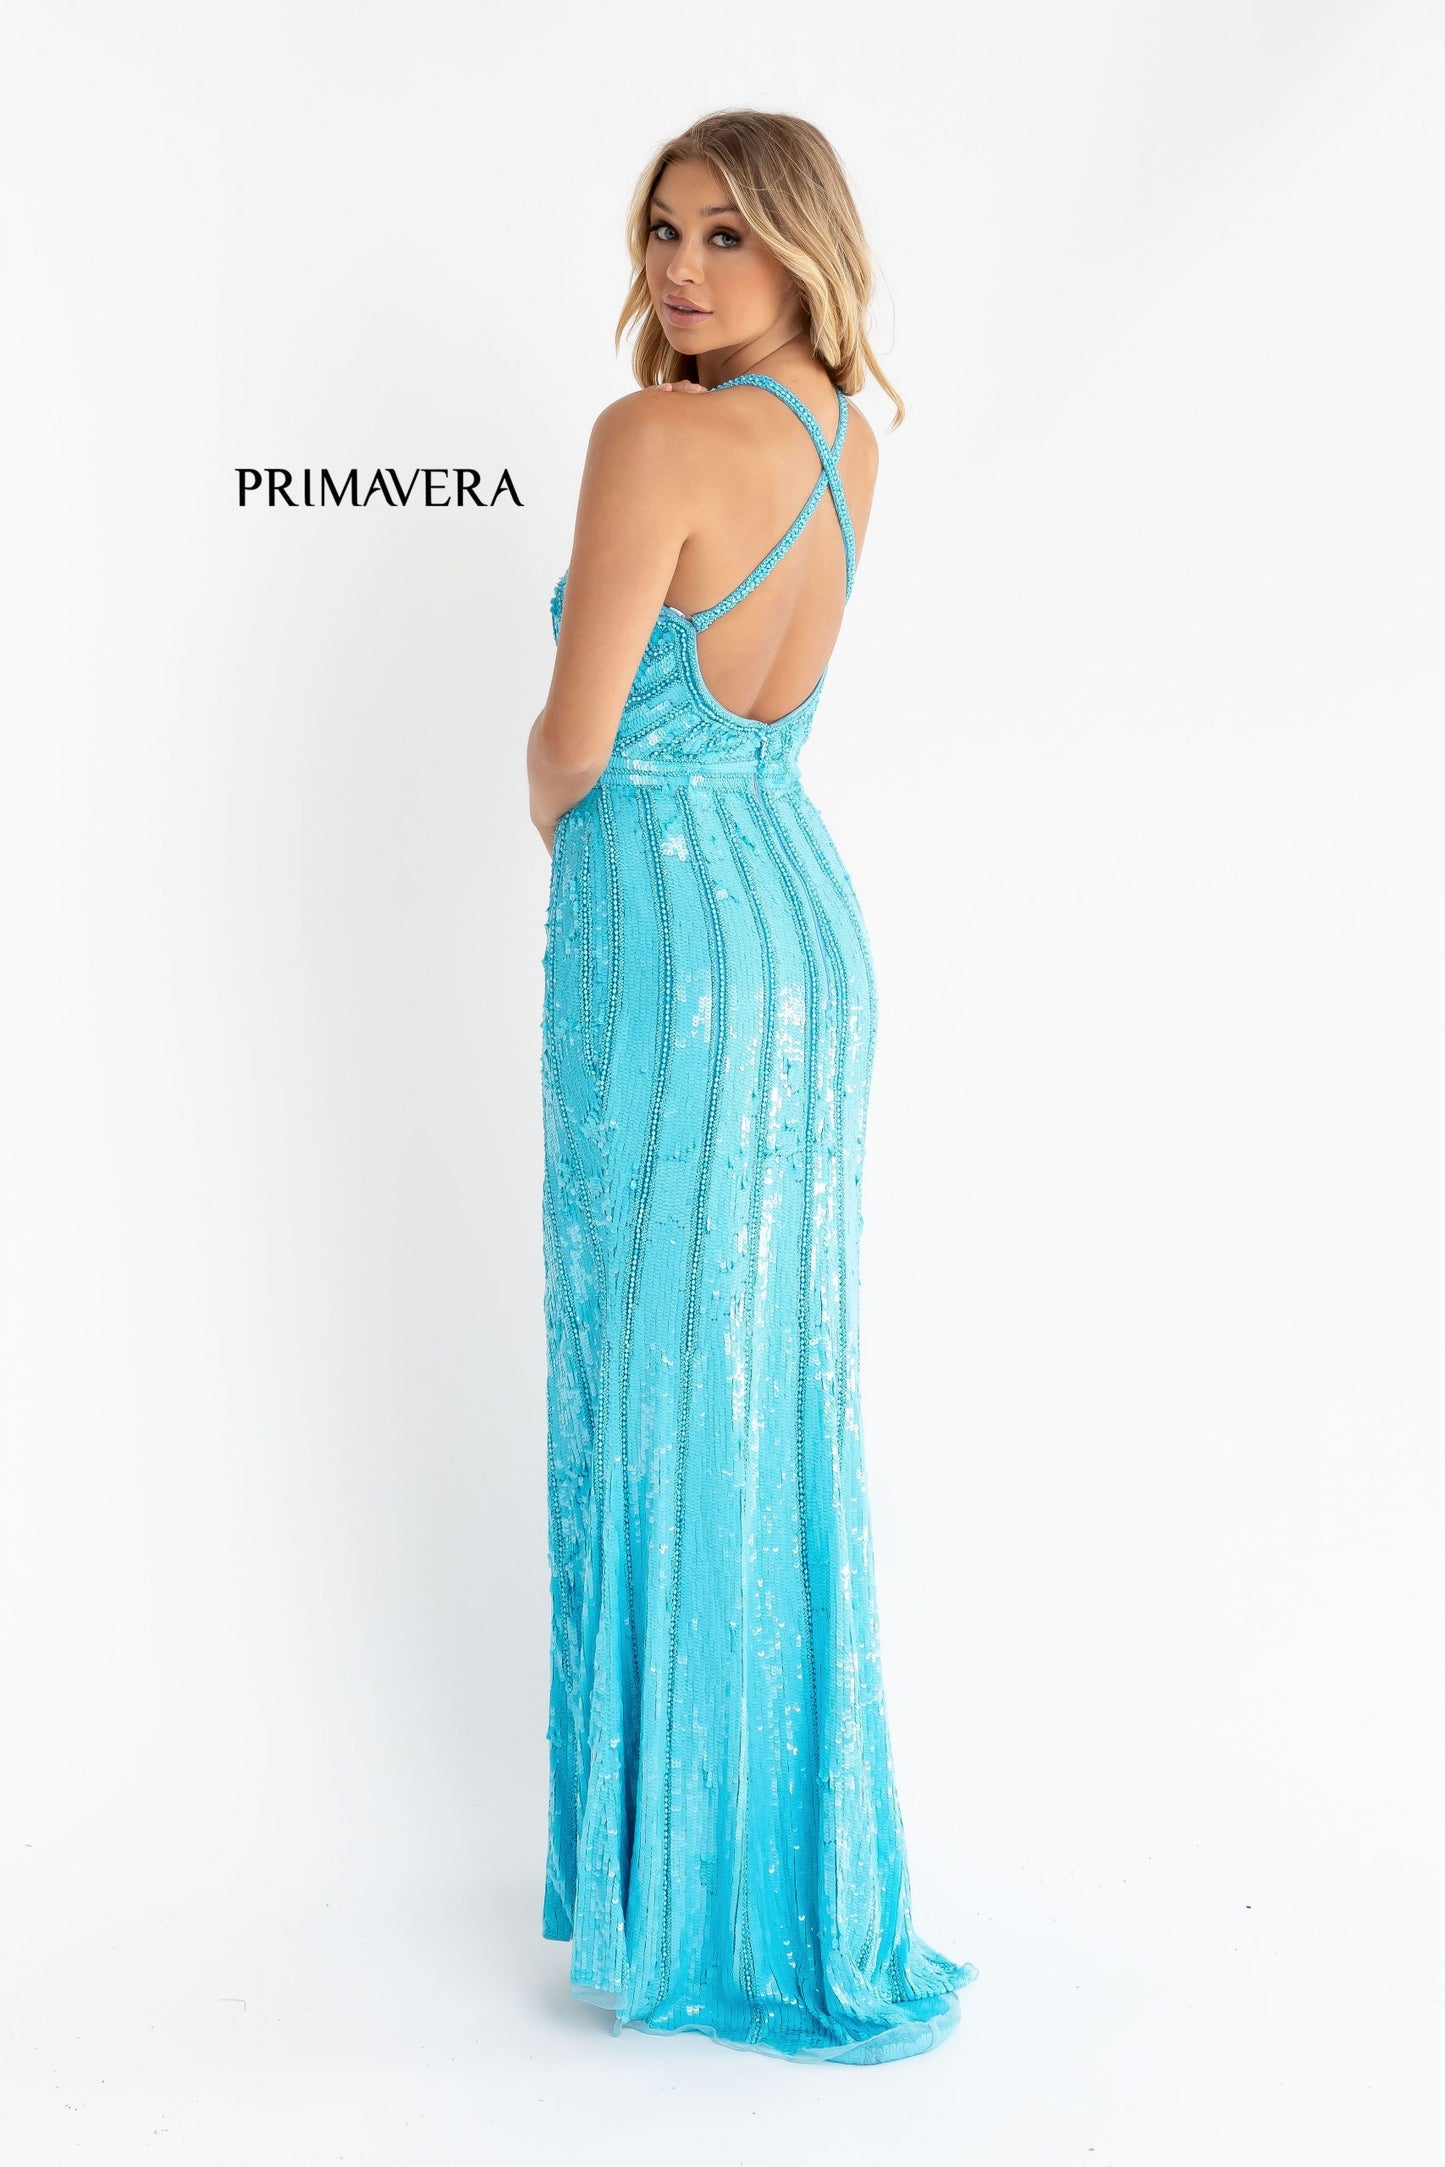 Primavera Couture 3441 is a iridescent sequins long formal Prom Dress, Pageant Gown, Wedding Dress & Formal Evening Wear gown. Featuring a v neckline with Iridescent Multi sequins and Hand Embellishments. This evening gown is perfect for any formal event! Slit in skirt.